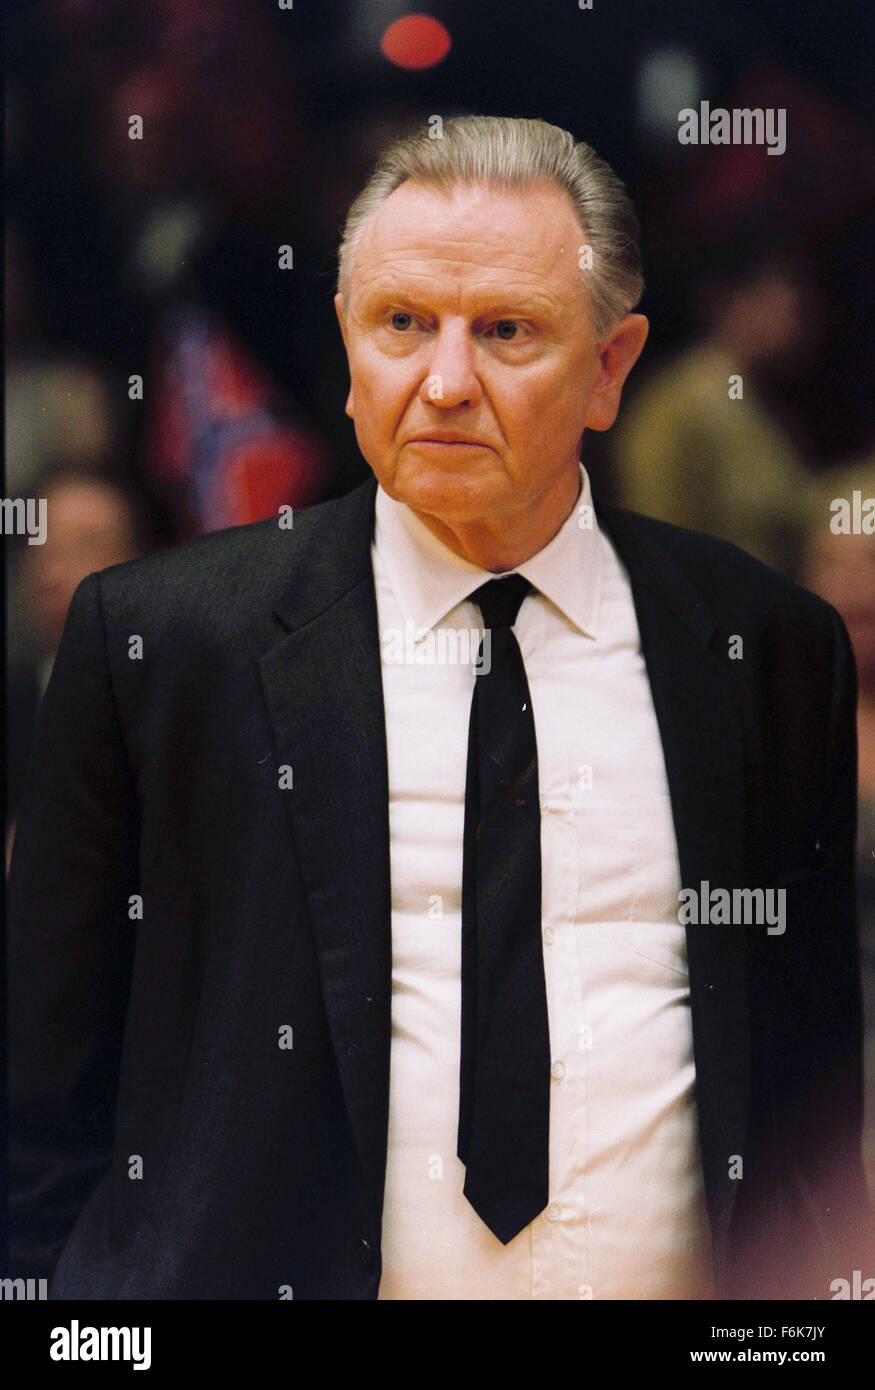 RELEASE DATE: Jan 11, 2006;STUDIO: Walt Disney Pictures. PLOT: In 1966, Texas Western coach Don Haskins led the first all-black starting line-up for a college basketball team to the NCAA national championship. PICTURED:     JON VOIGHT as Adolph Rupp. Stock Photo